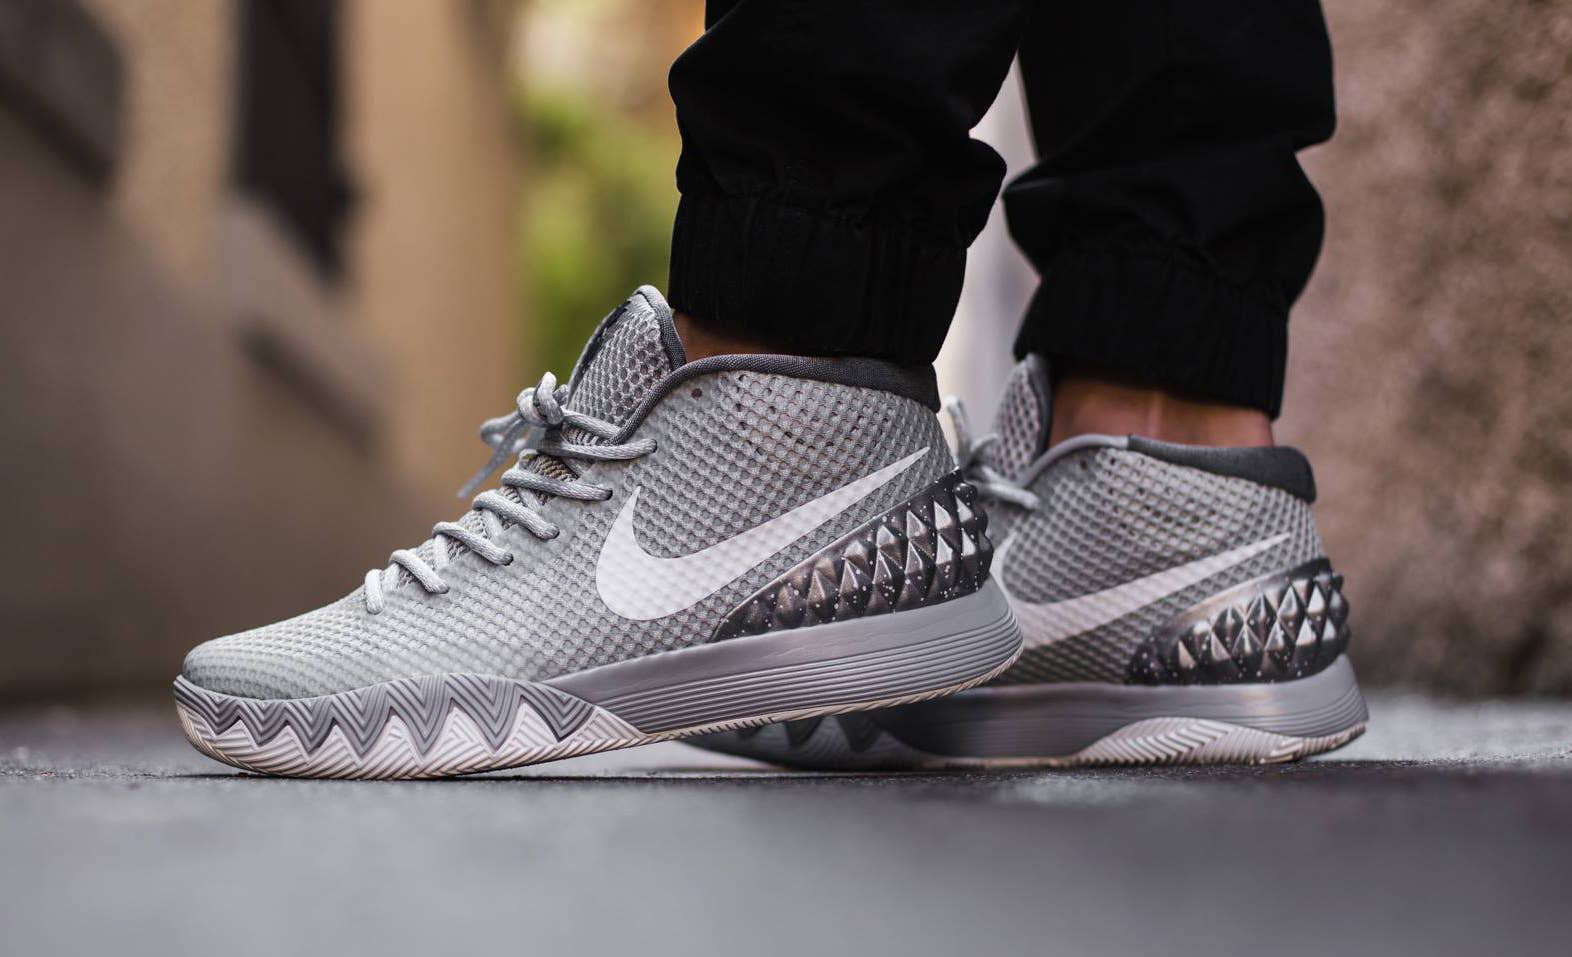 See the 'Wolf Grey' Nike Kyrie 1 Looks On-Feet Complex